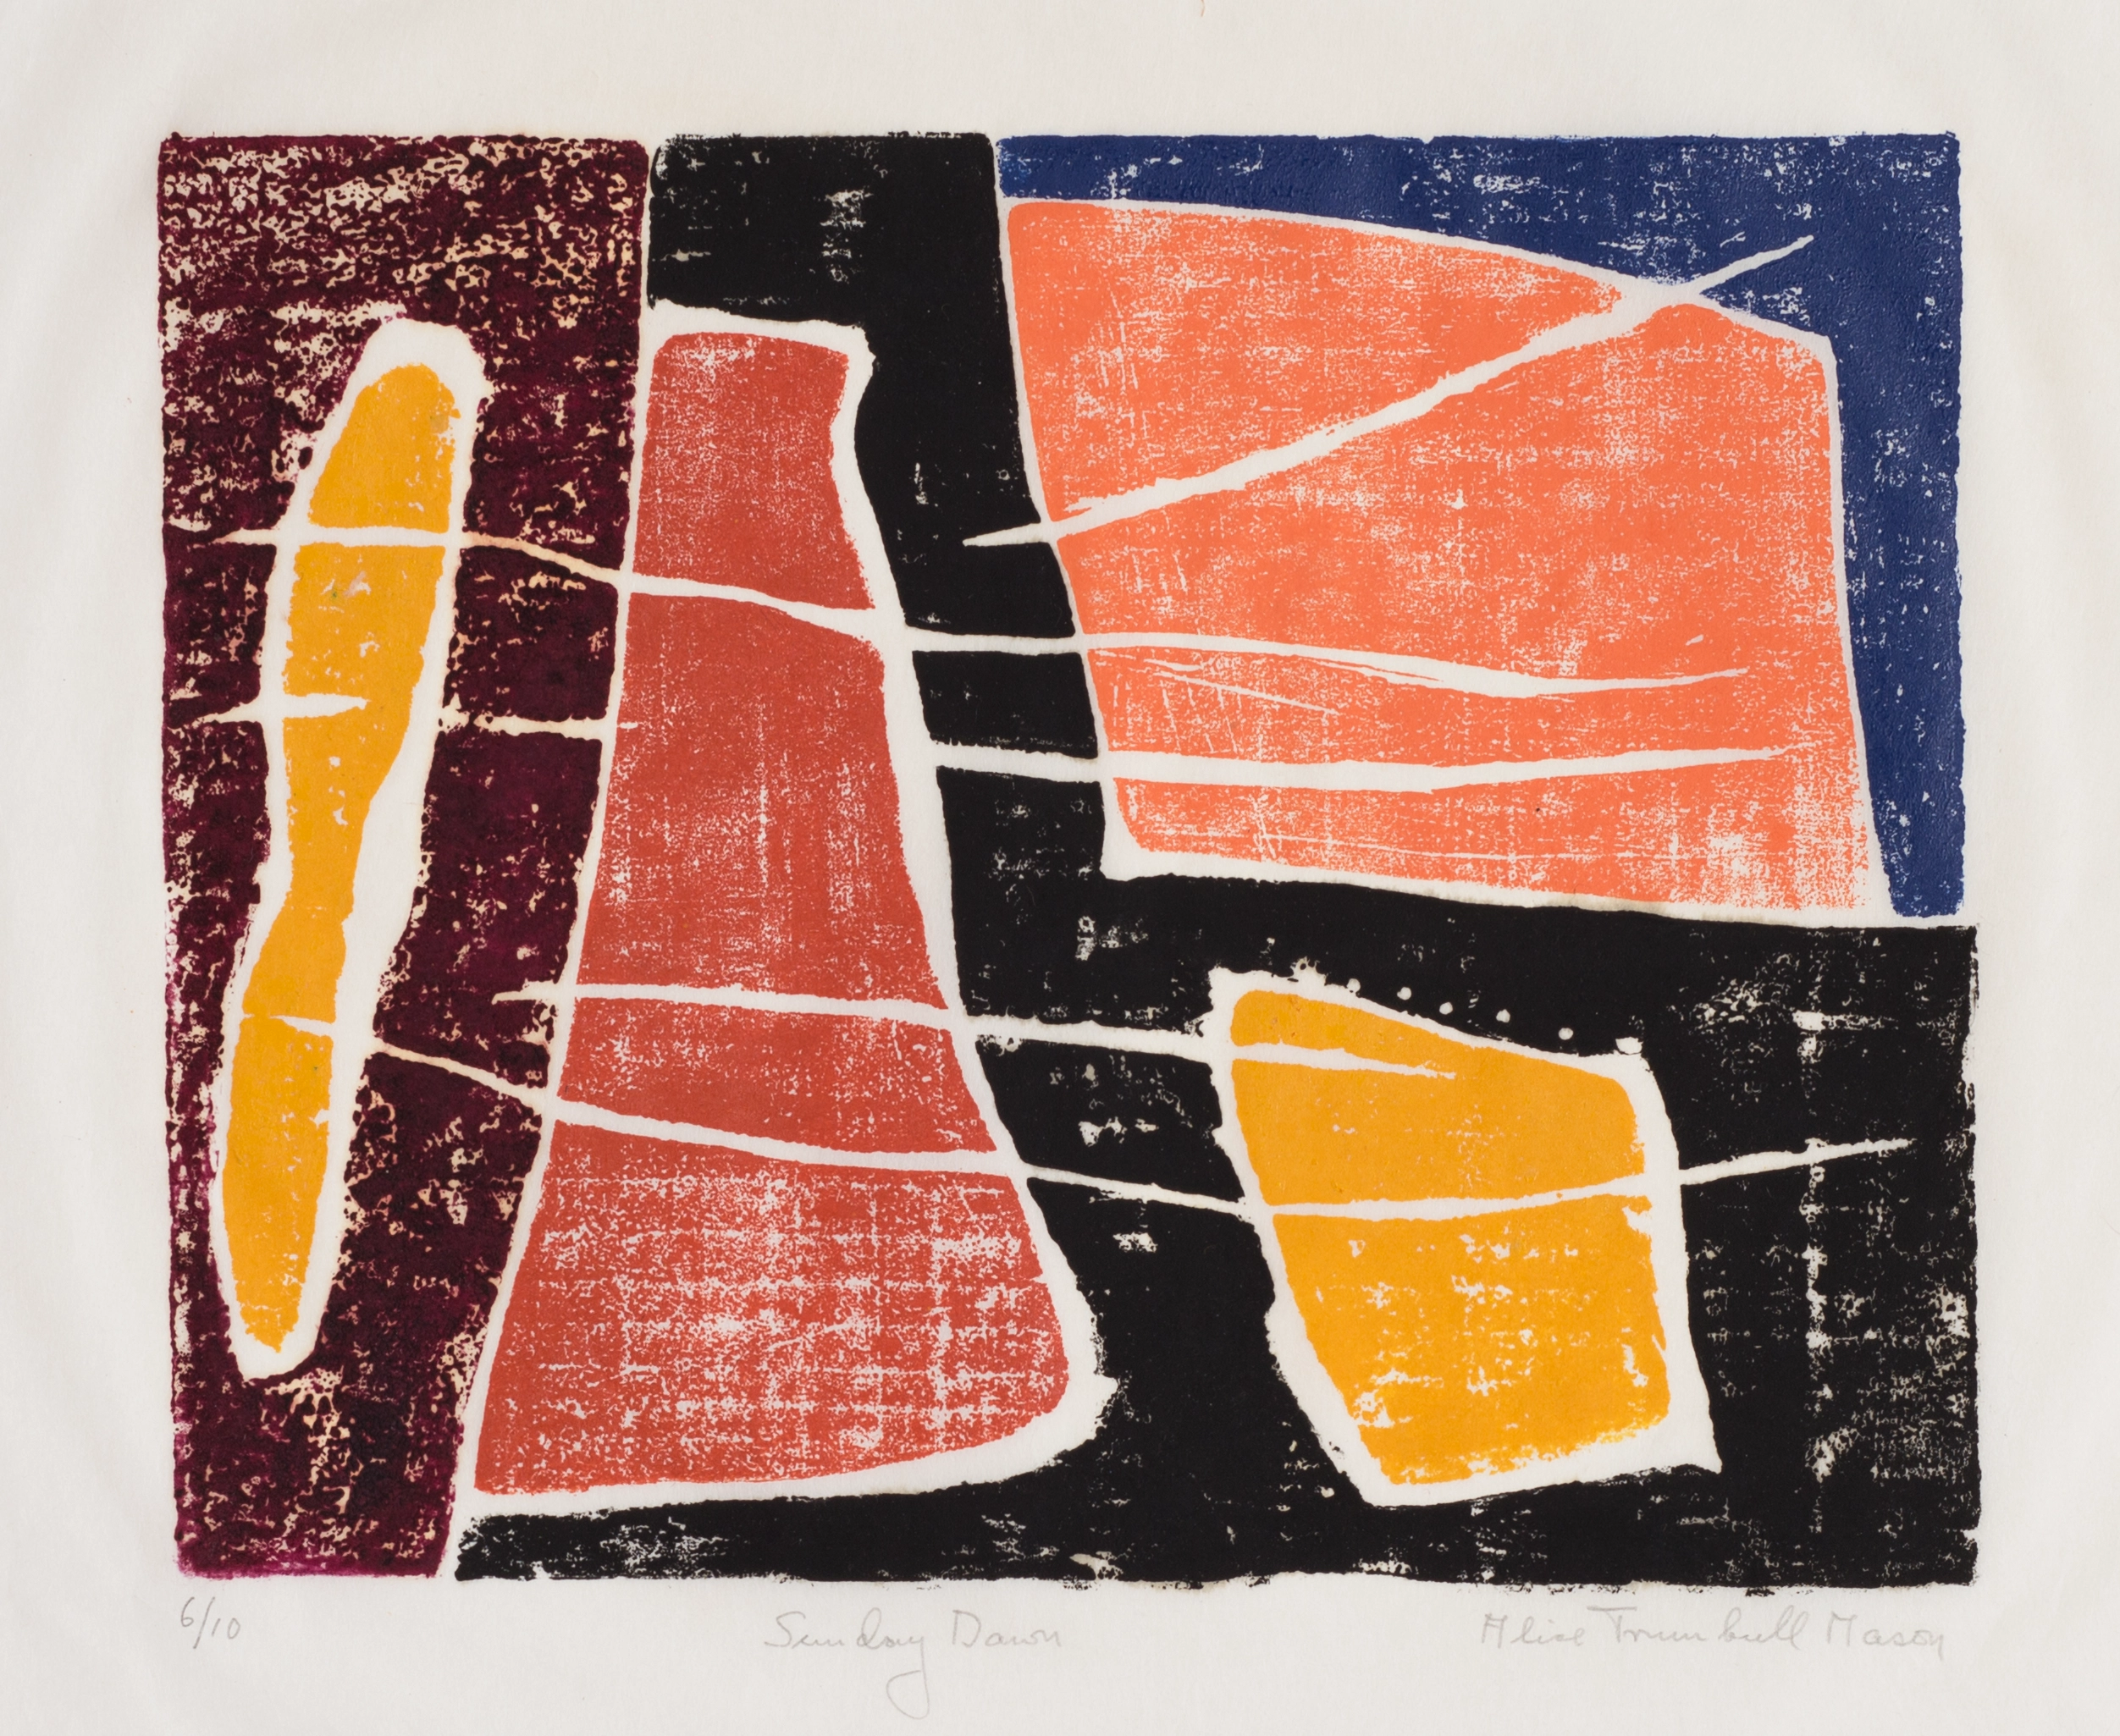 Abstract print on paper comprised of yellow, red, orange, blue, black, and burgundy organic forms. White lines move horizontally throughout the composition.